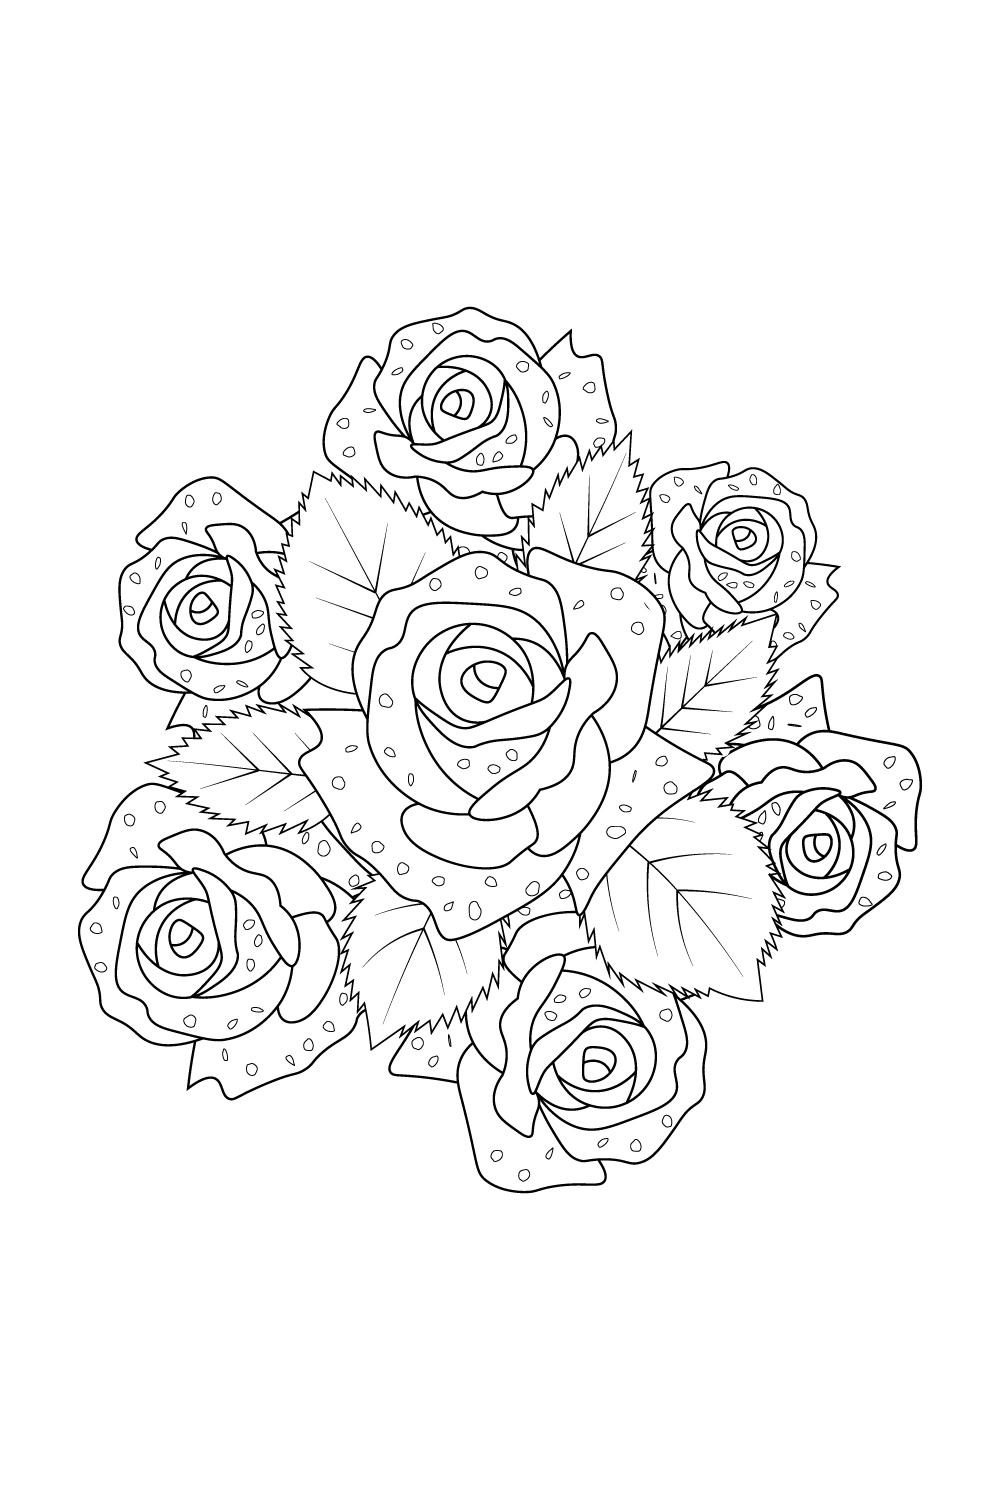 realistic sketch rose drawing, realistic sketch rose drawing, tattoo realistic sketch rose drawing, rose line drawing tattoo design, black rose outline, easy rose drawing the outline, outline easy rose vine drawing pinterest preview image.